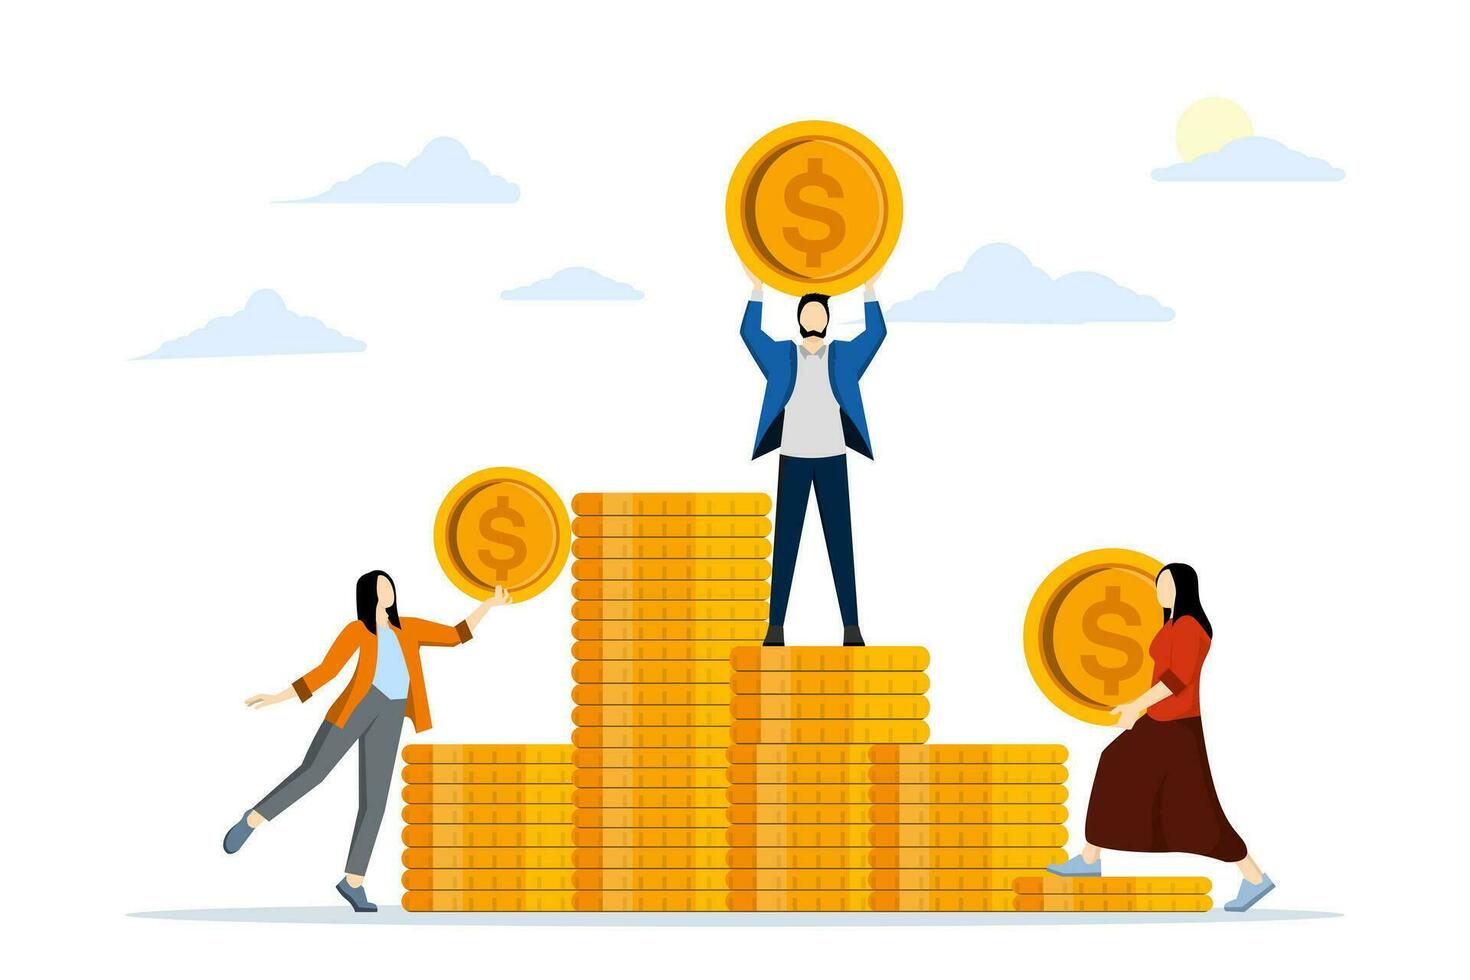 Financially rich. Leadership achievements in finance. Financial professional or banker. Businessman and employee standing on gold coins. flat vector illustration on a white background.